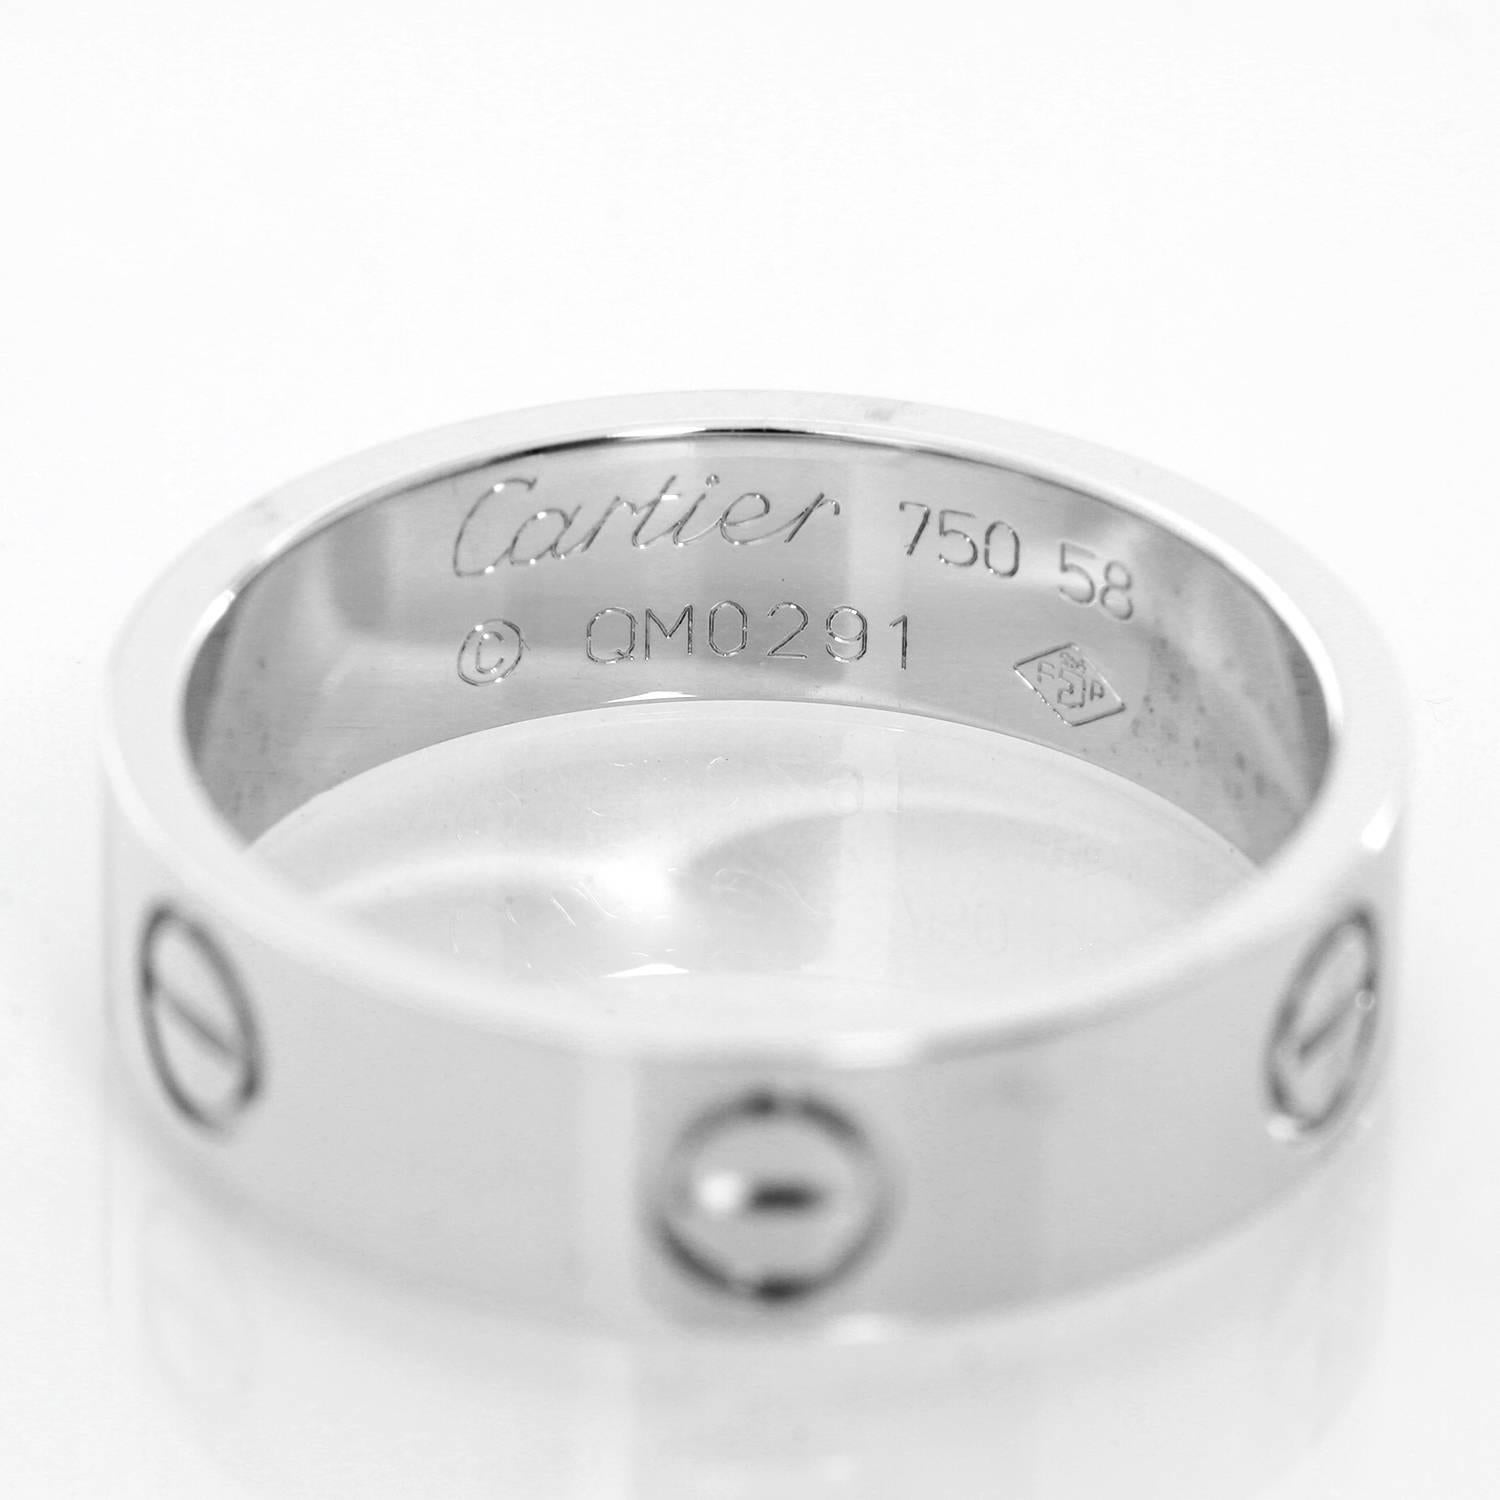 Cartier Love 18k White Gold Wedding Ring Band Sz. 58 (8-3/4)) - . This genuine Cartier Love ring measures 5.5 mm in width. It is stamped Cartier, 750, 58, QM0291 Size is 58 (8-3/4)). Authenticity guaranteed! Pre-owned with Cartier box.